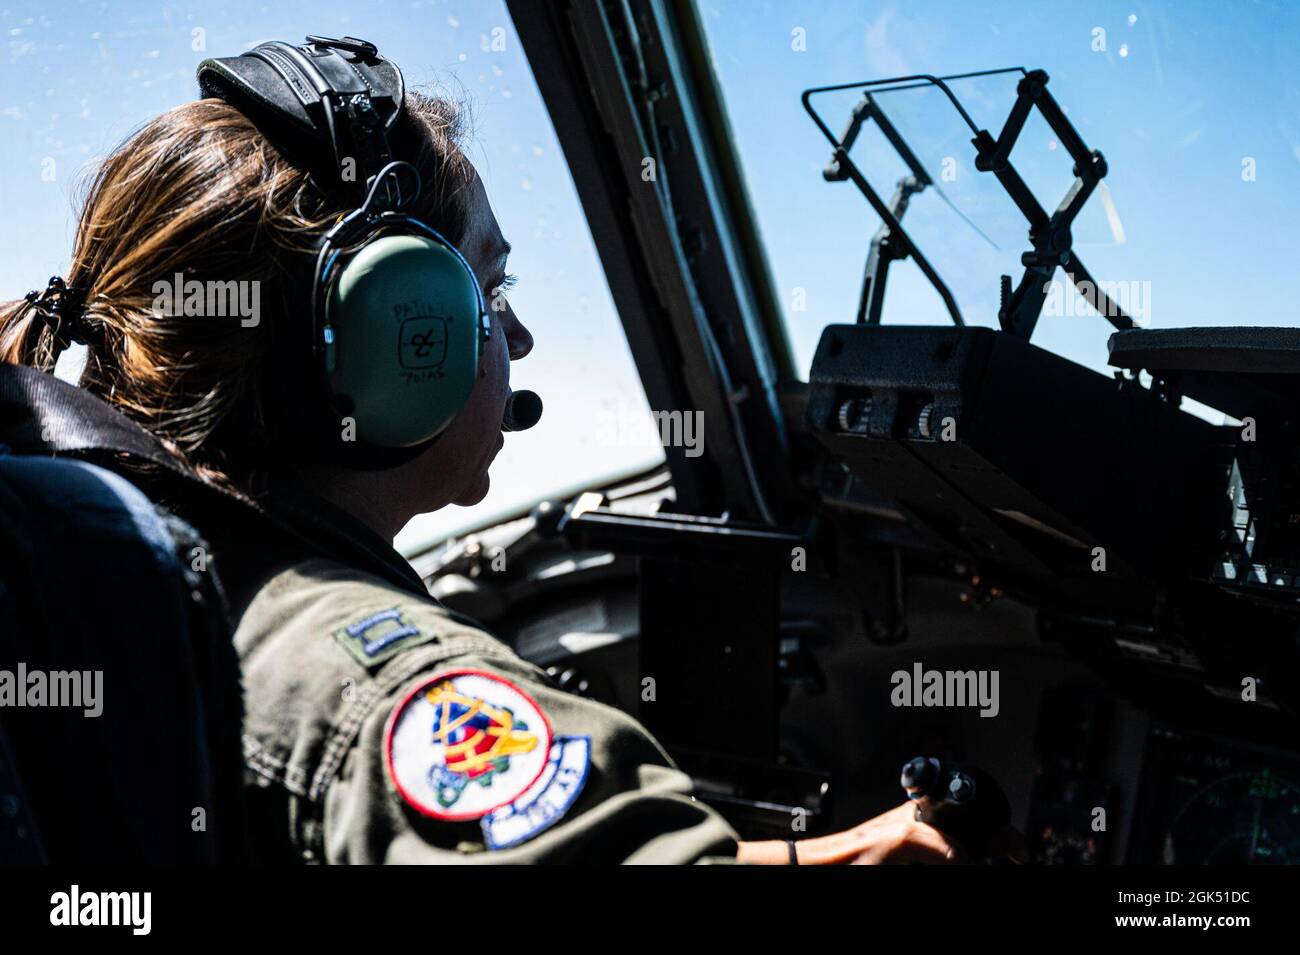 U.S. Air Force Reserve Capt. Chelsea Patino, C-17 pilot, flies a U.S. AFRC C-17 Globemaster III, assigned to the 437th Airlift Wing and 315th Airlift Wing, Joint Base Charleston, South Carolina as it receives fuel from a U.S. Air National Guard KC-135R Stratotanker, assigned to the 121st Air Refueling Wing, Ohio ANG over the southeastern United States Aug. 3, 2021. The C-17 was operated by the U.S. Air Force Reserve's 701st Airlift Squadron. Stock Photo